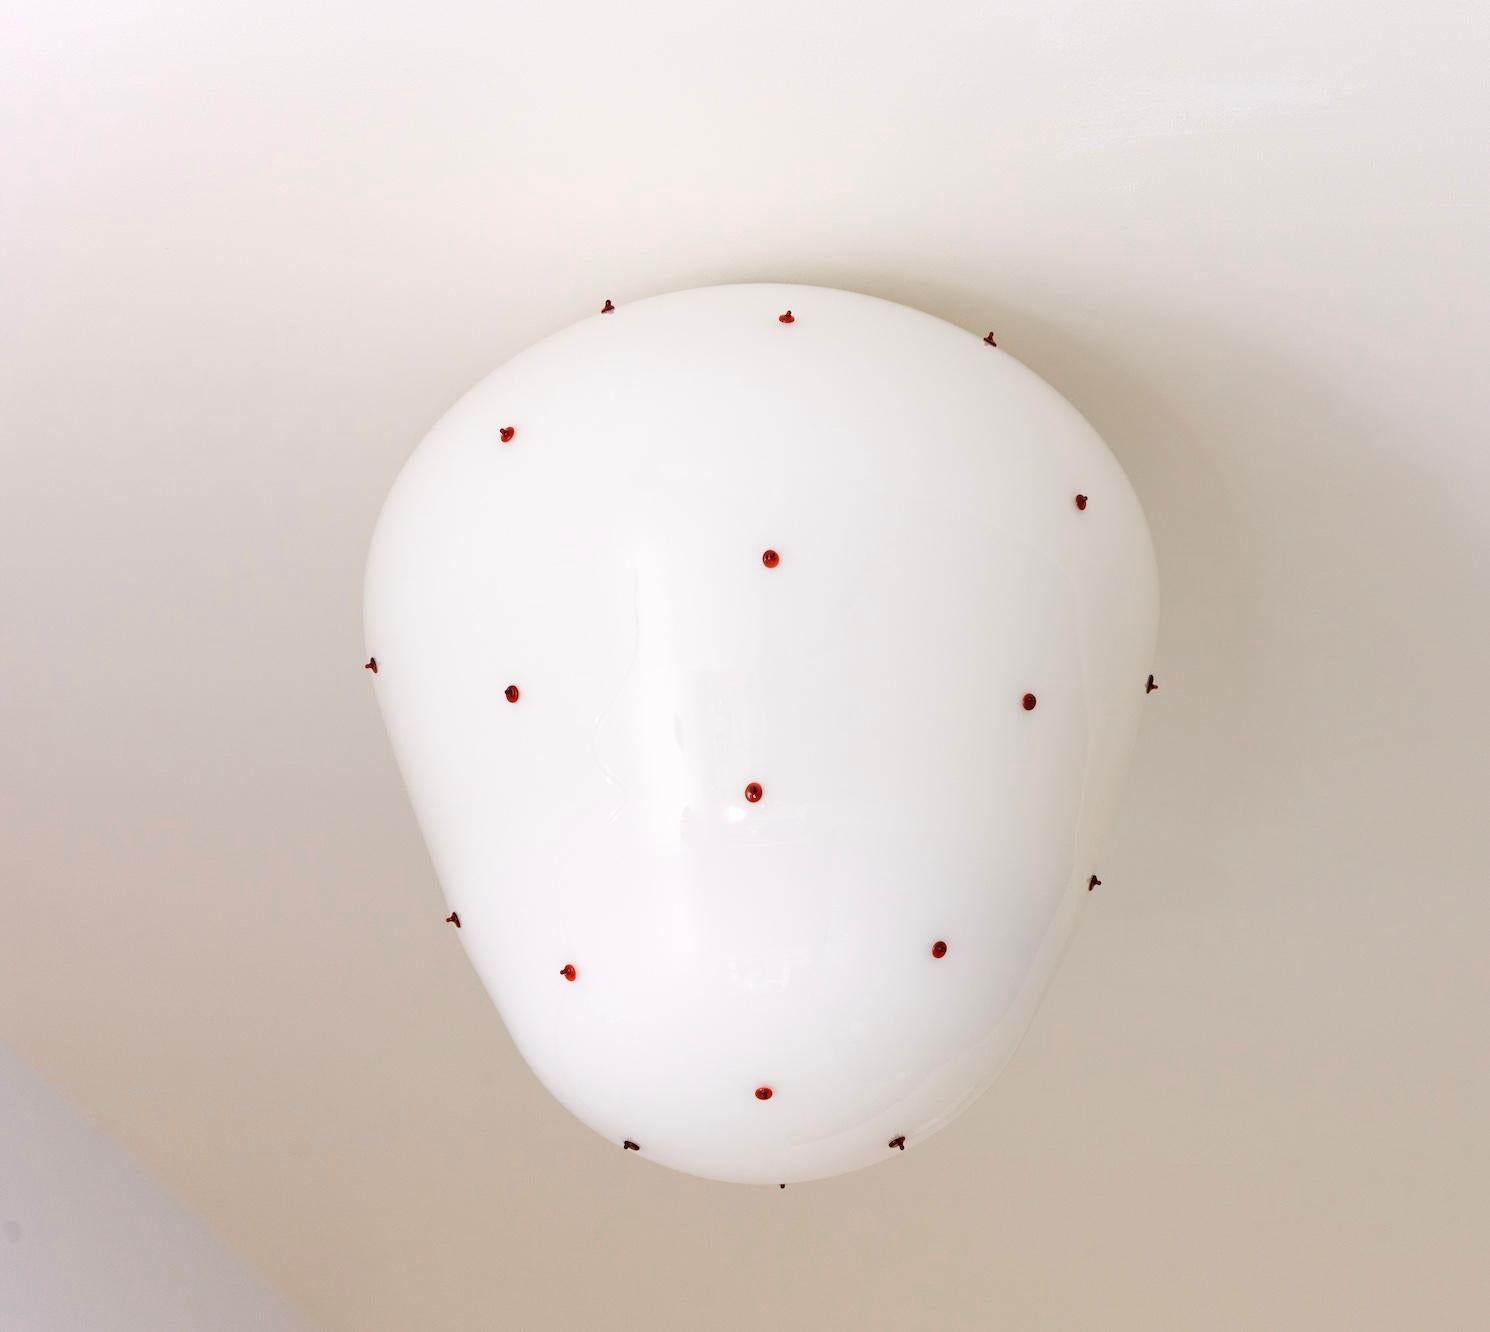 Berries blown glass wall light designed by French designer Duo Marie & Alexandre.

The Berries collection is handblown in Paris by a master glassblower, patiently handblown without the use of molds.
This meticulous process allows for subtle